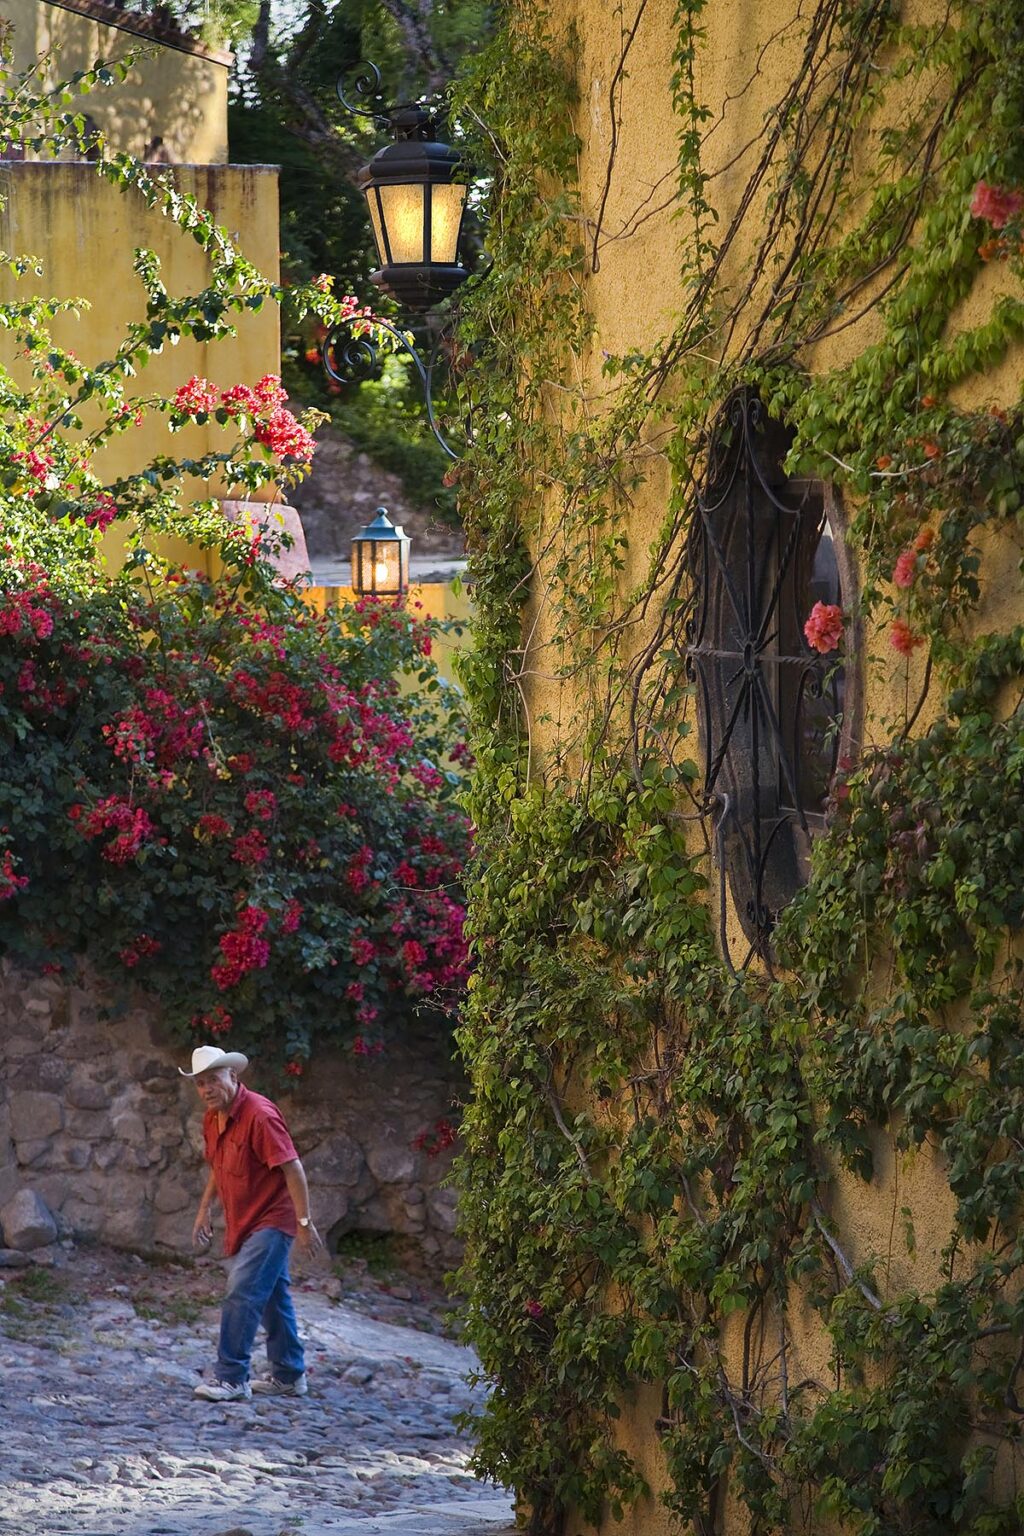 A Mexican man walks through the COBBLE STONE STREETS with BOUGAINVILLEA covering the walls of the houses - SAN MIGUEL DE ALLENDE, MEXICO